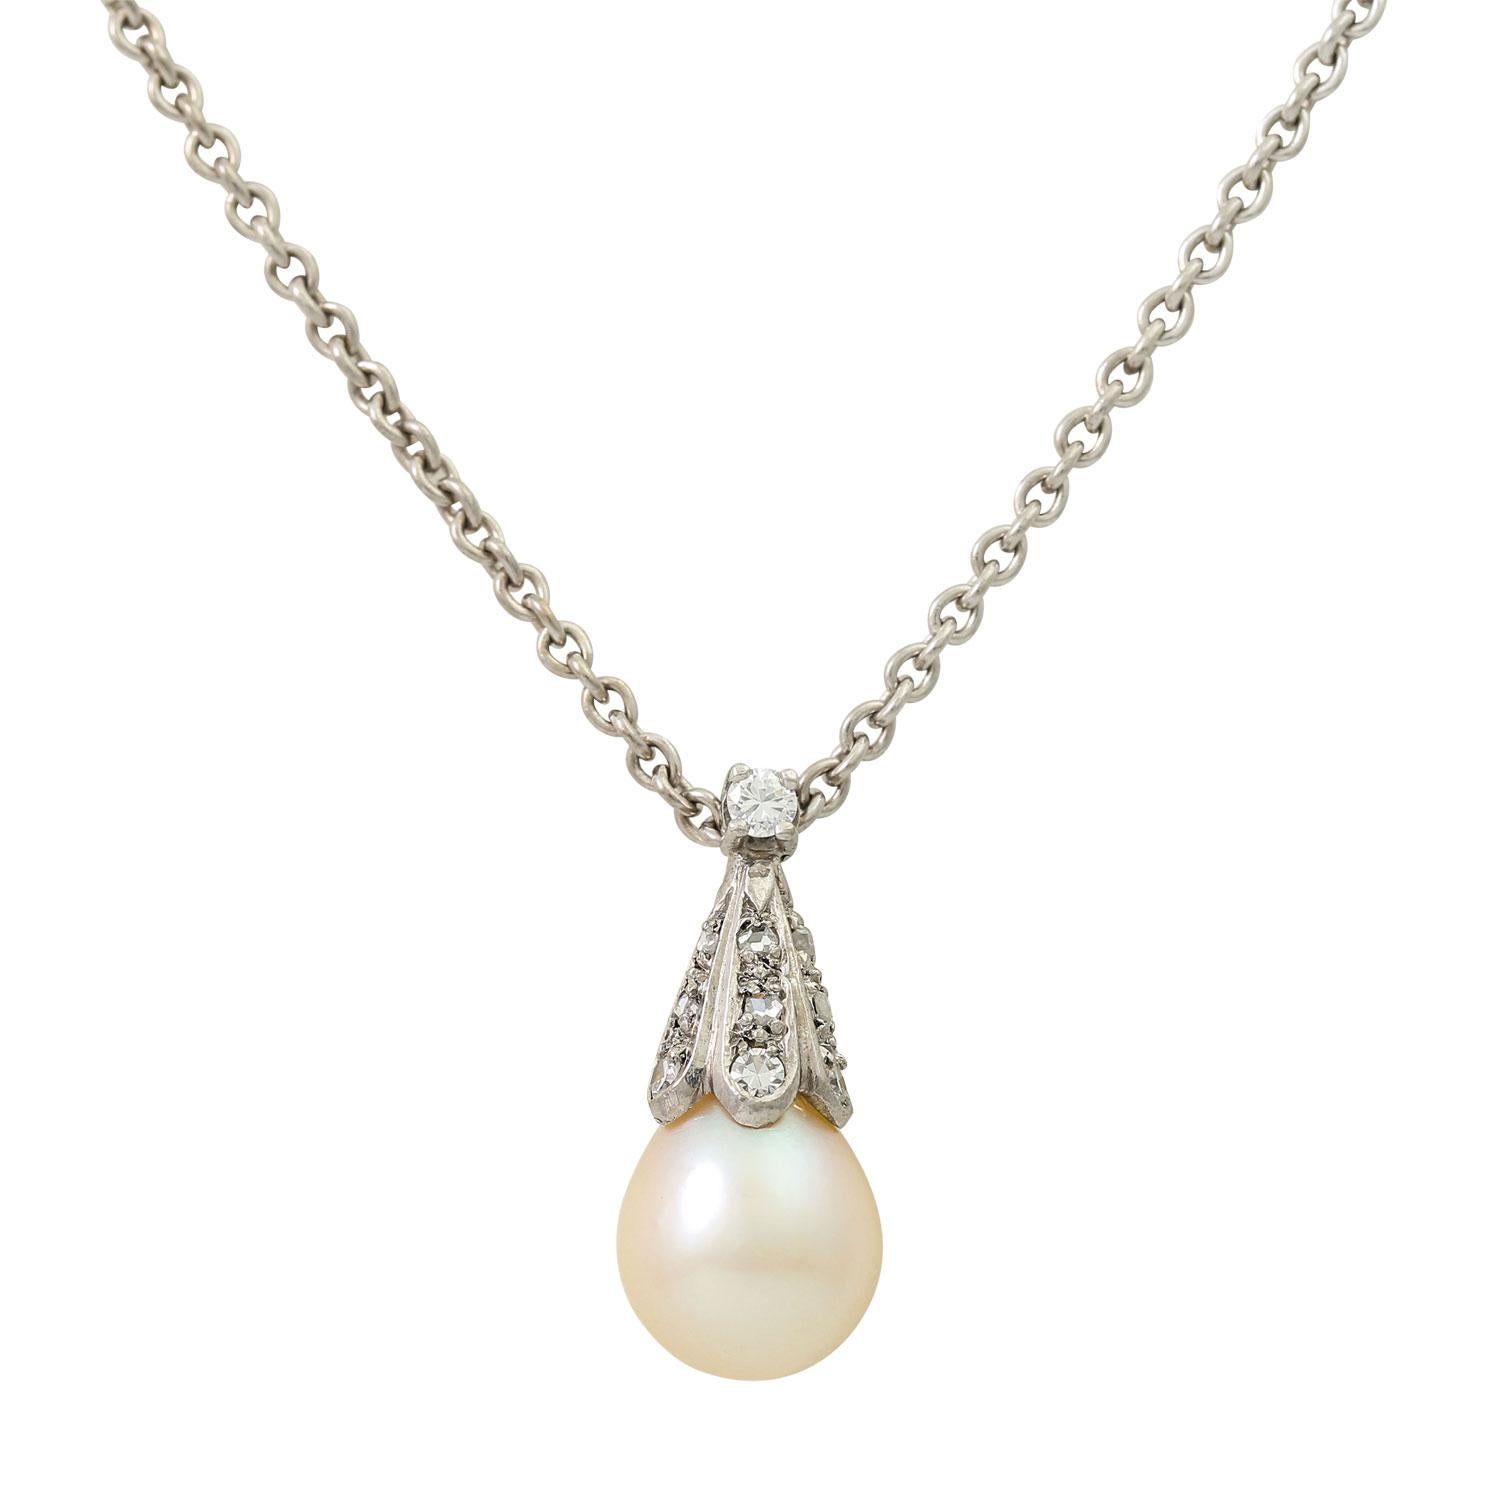 Diamond roses and brilliant total approx. 0.23 ct, good color and clarity, cultured pearl approx. 8 mm, on anchor chain, L: approx. 46 cm, WG 14K, 6.8 g, mid 20th century, minimal signs of wear, with Case lock and safety eight.

 Drop pendant with